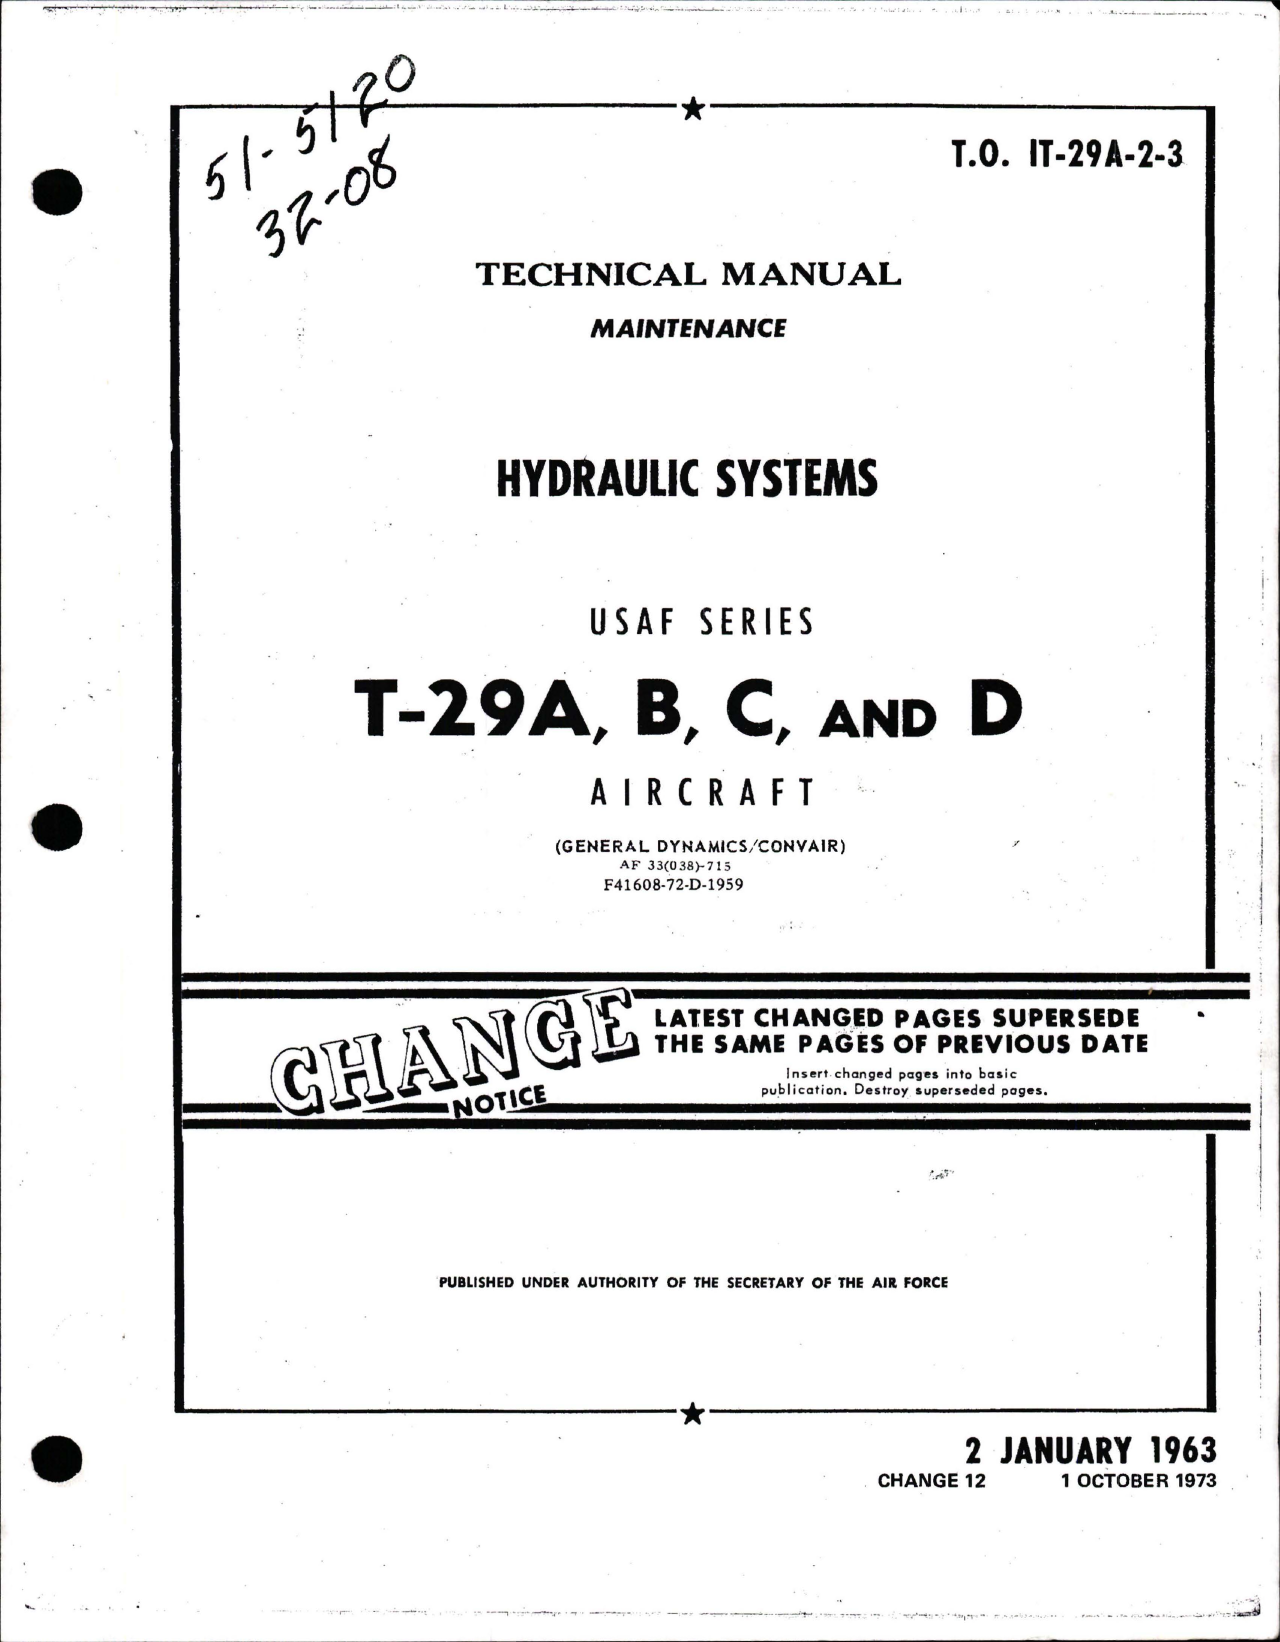 Sample page 1 from AirCorps Library document: Maintenance Manual for Hydraulic Systems for T-29A, T-29B, T-29C and T-29D